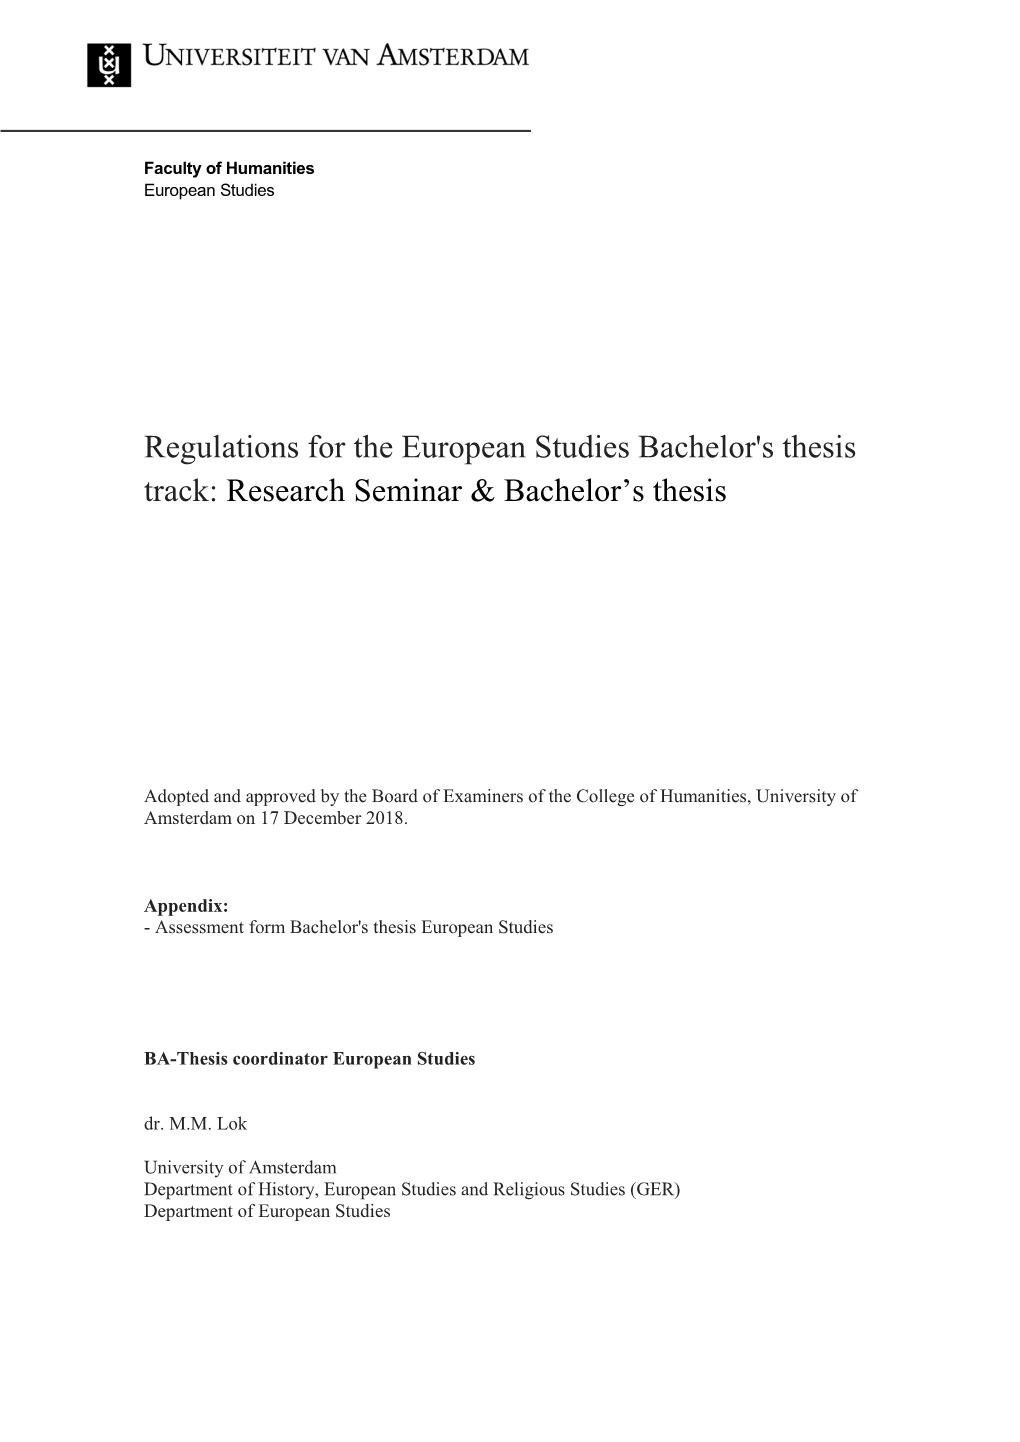 Regulations for the European Studies Bachelor's Thesis Track: Research Seminar & Bachelor’S Thesis